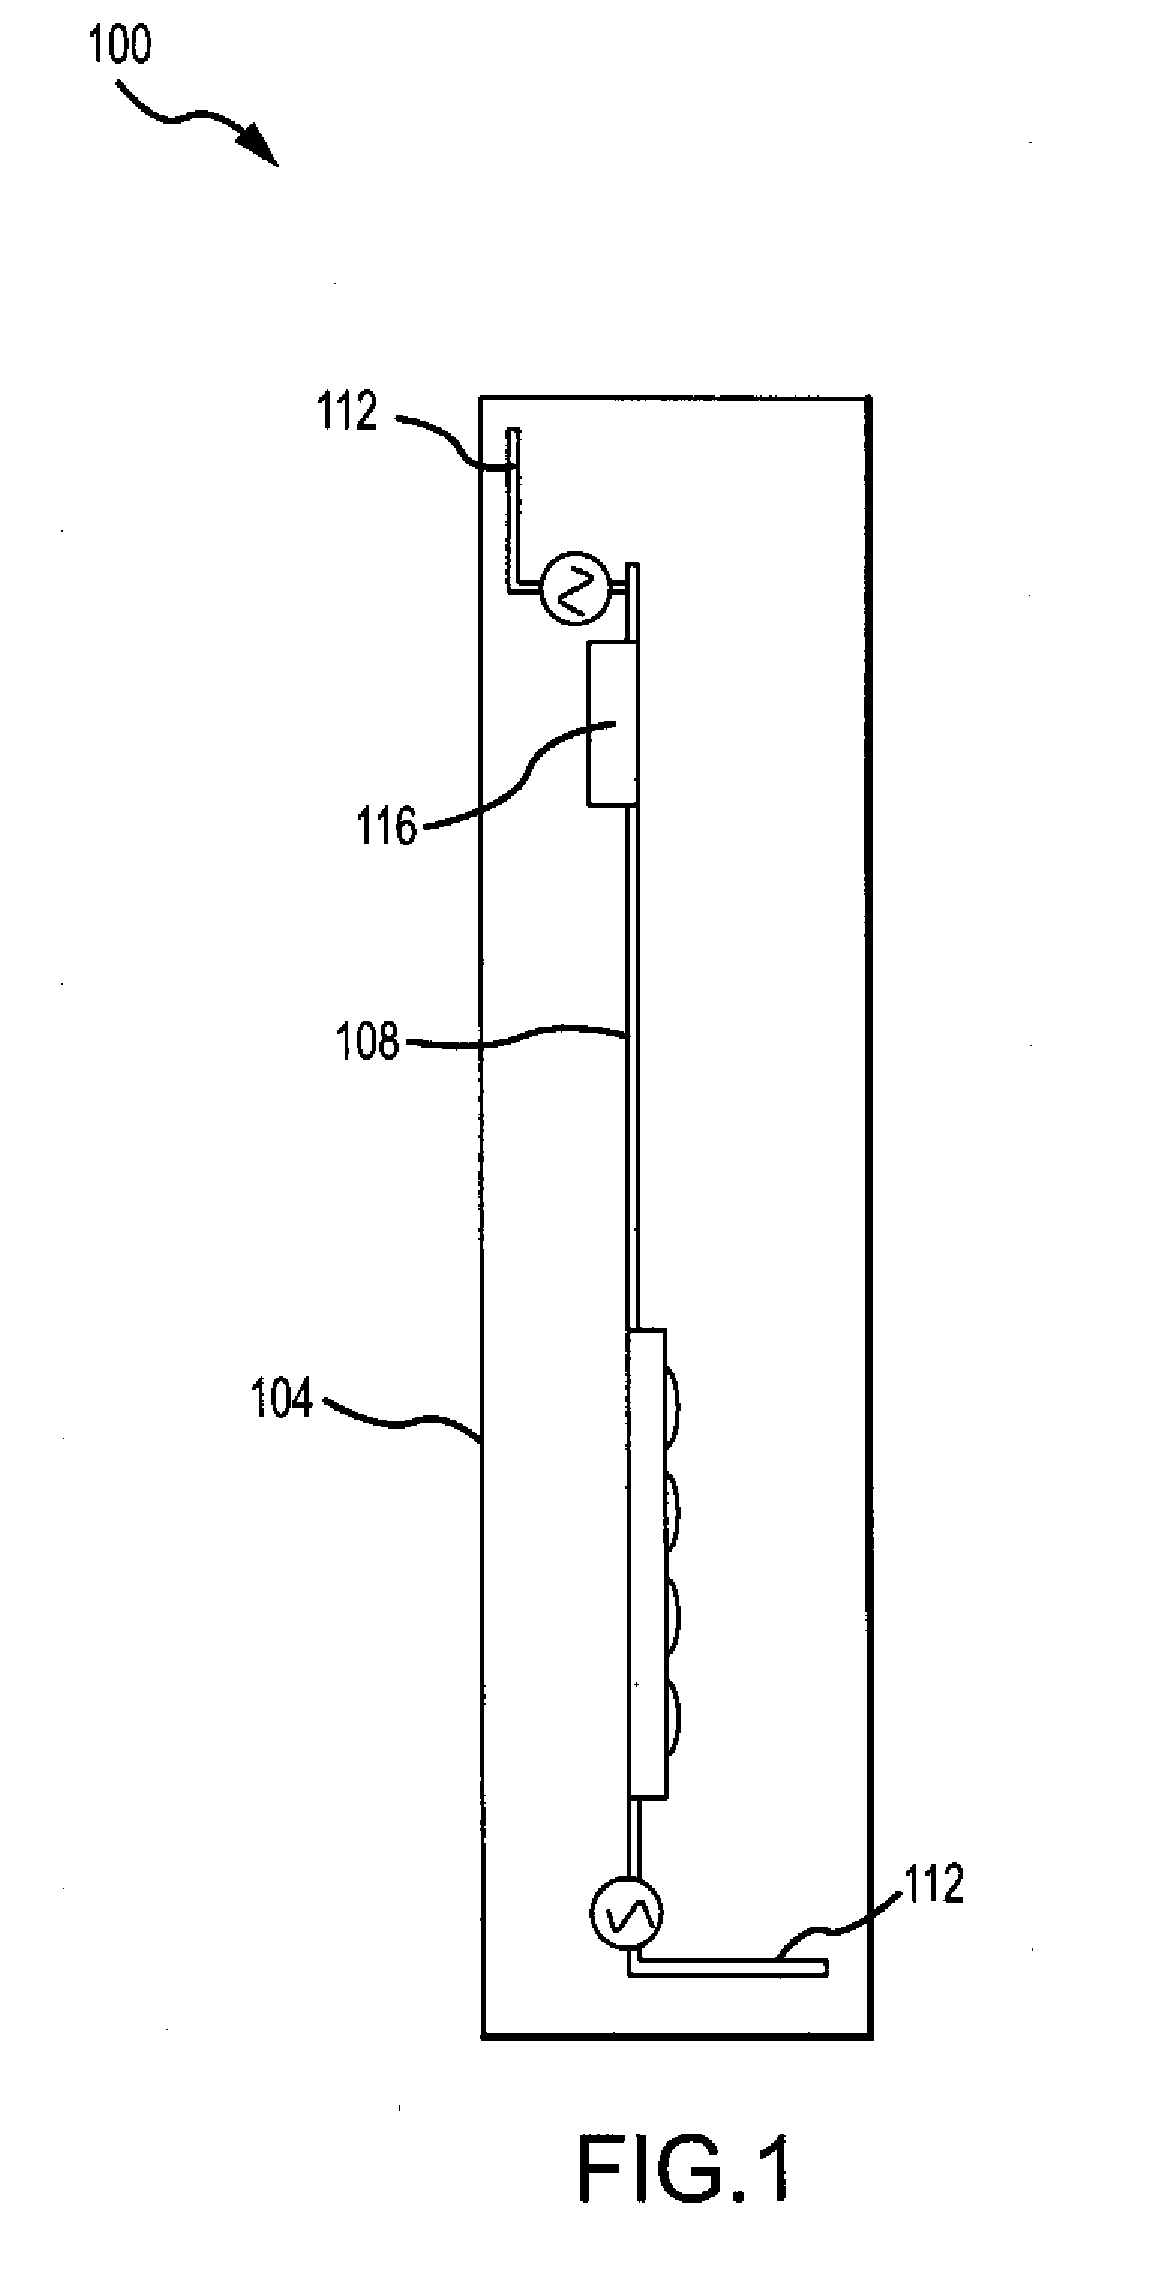 System for limiting mobile device functionality in designated environments